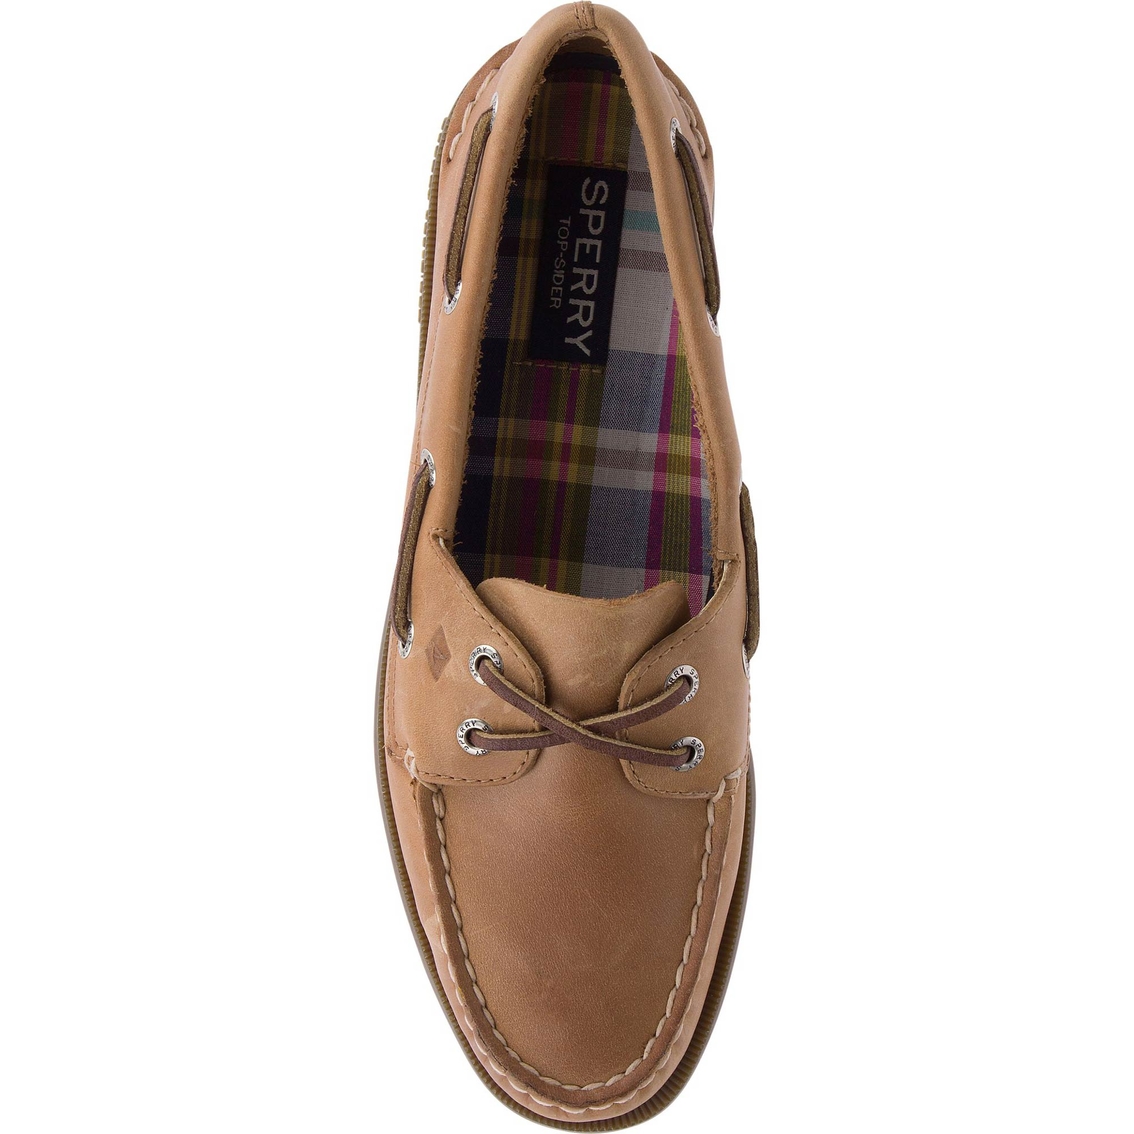 Sperry Authentic Original Two Eye Boat Shoes - Image 5 of 6